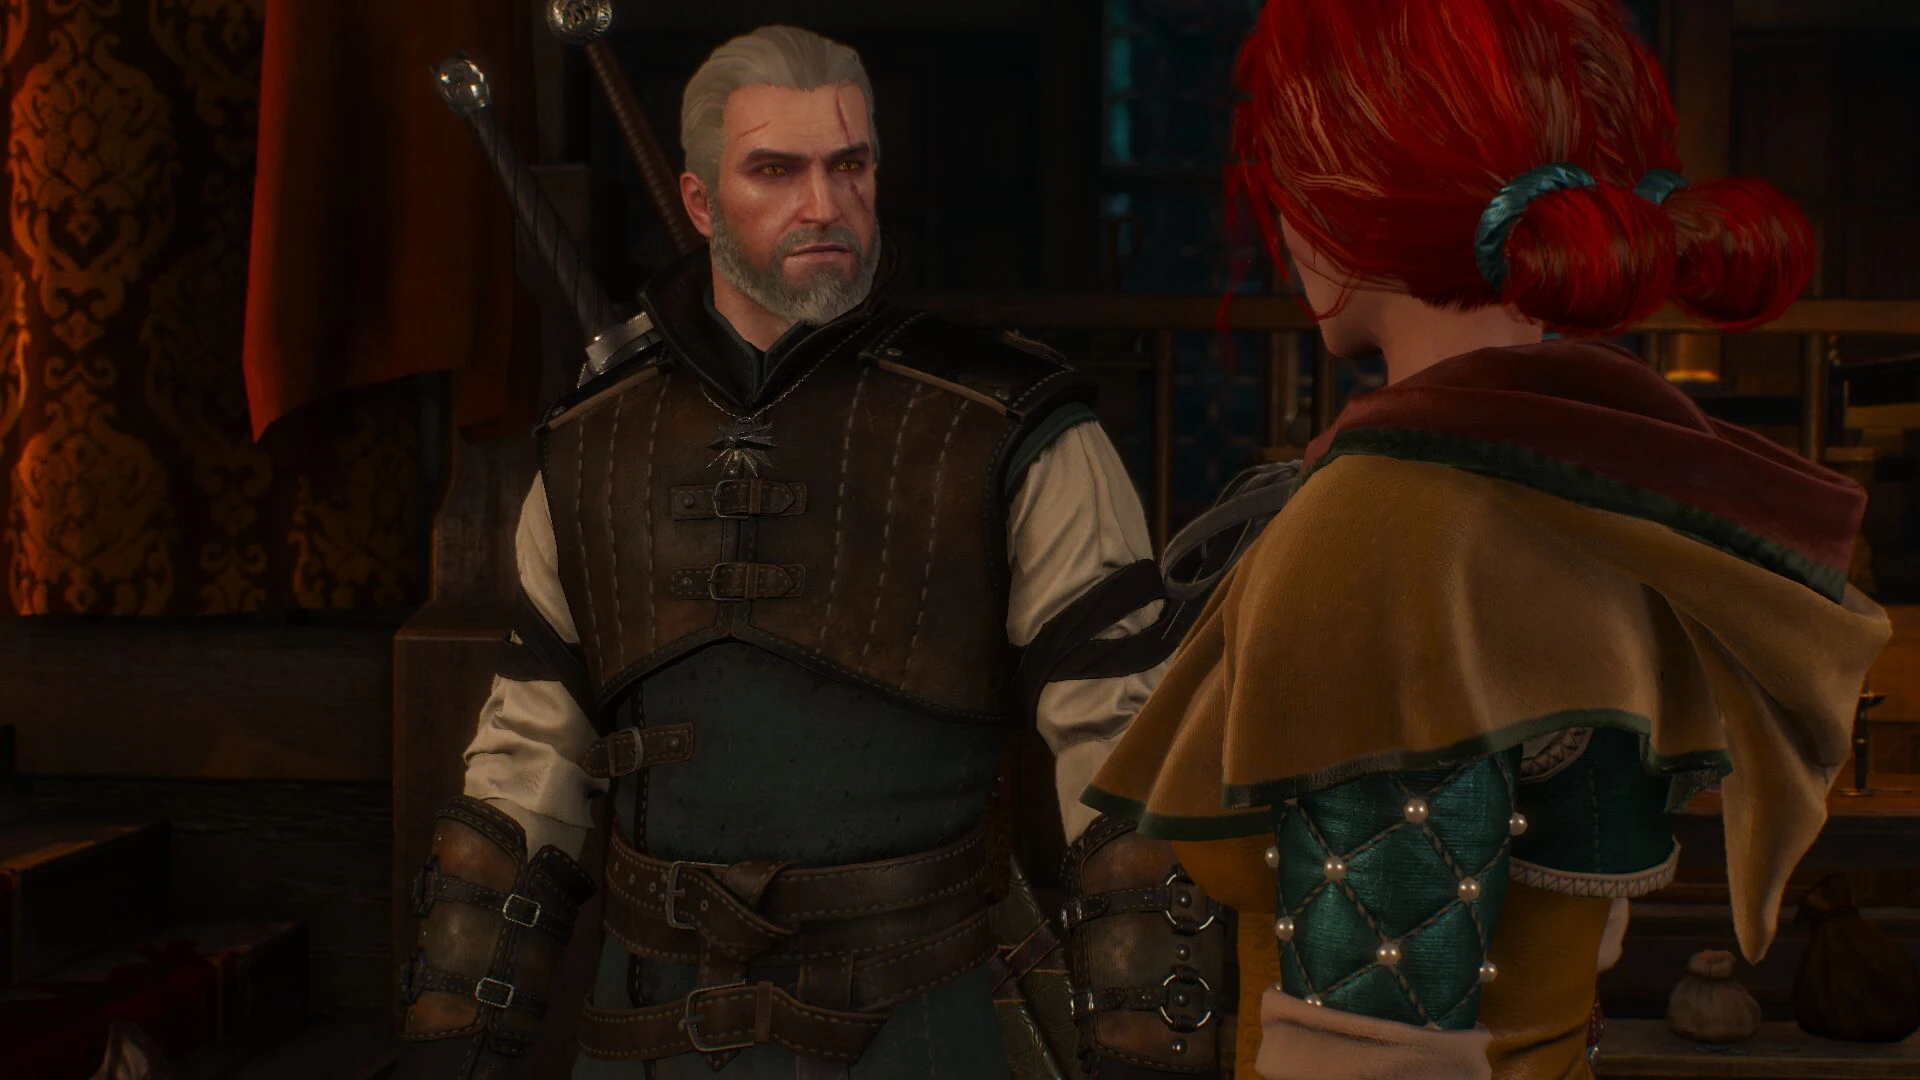 The witcher 3 witcher school gear фото 62